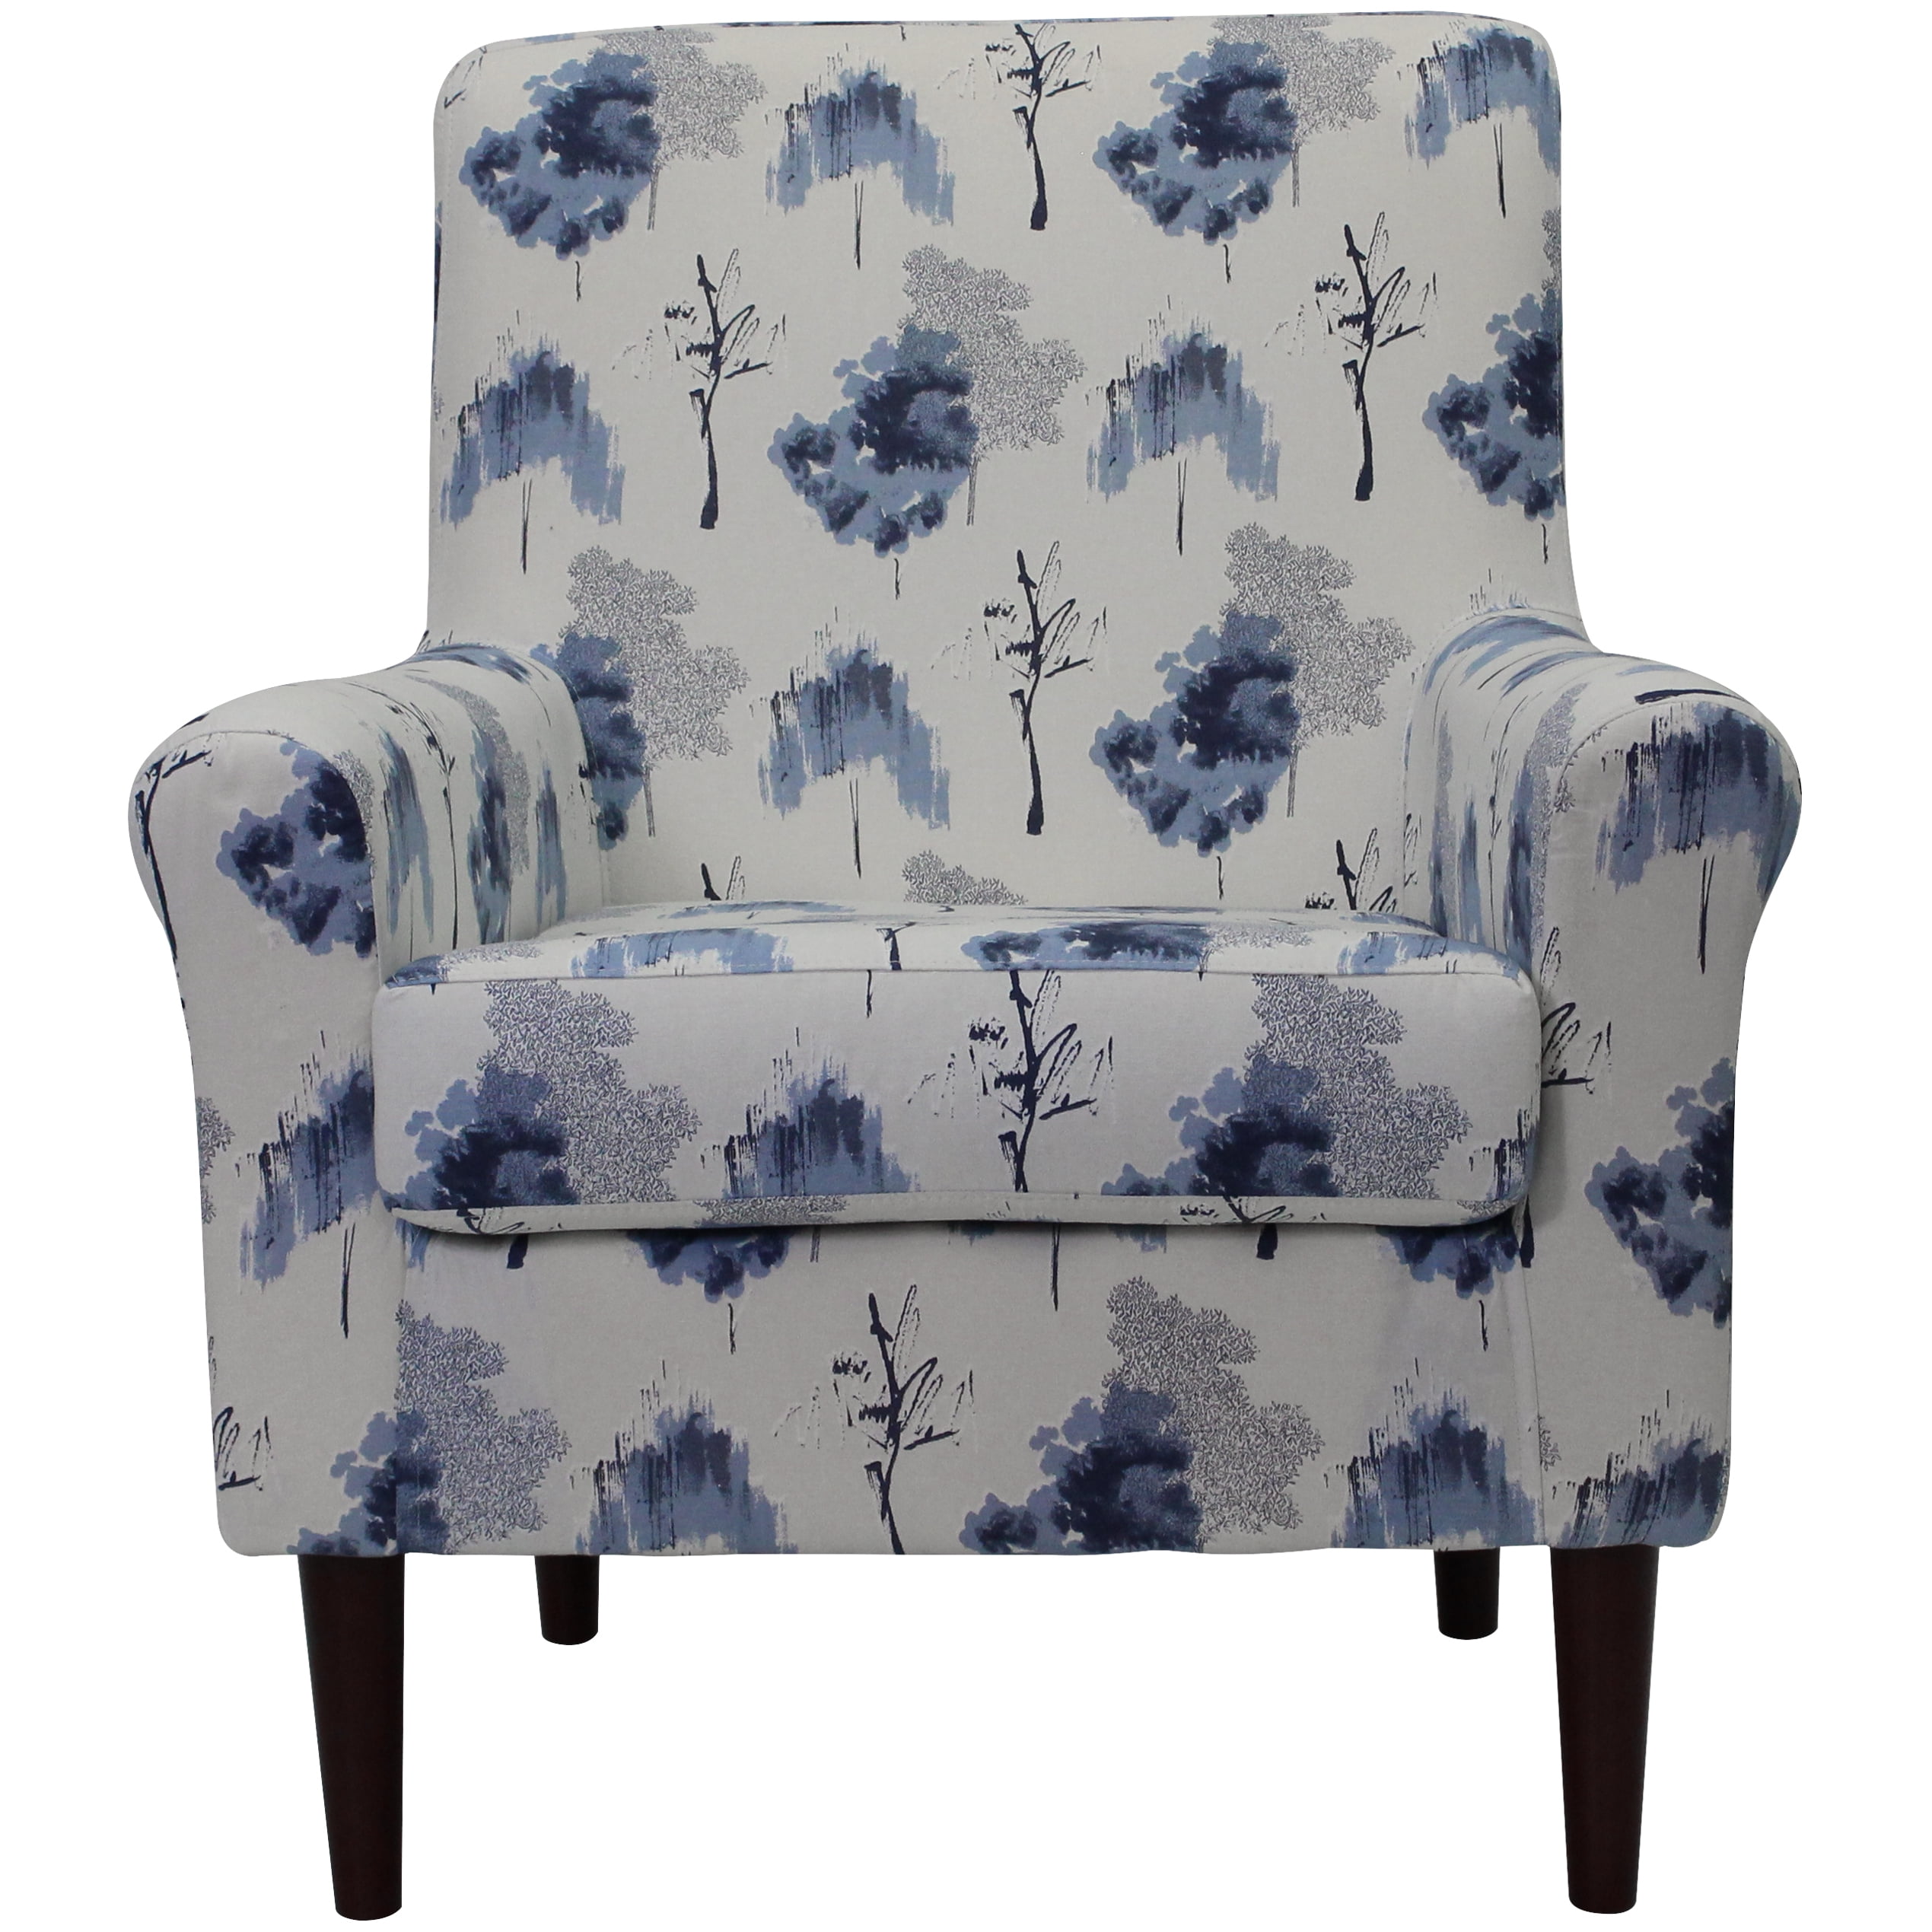 Navy Floral Upholstered Armchair Accent Chair Bedroom Fabric Living